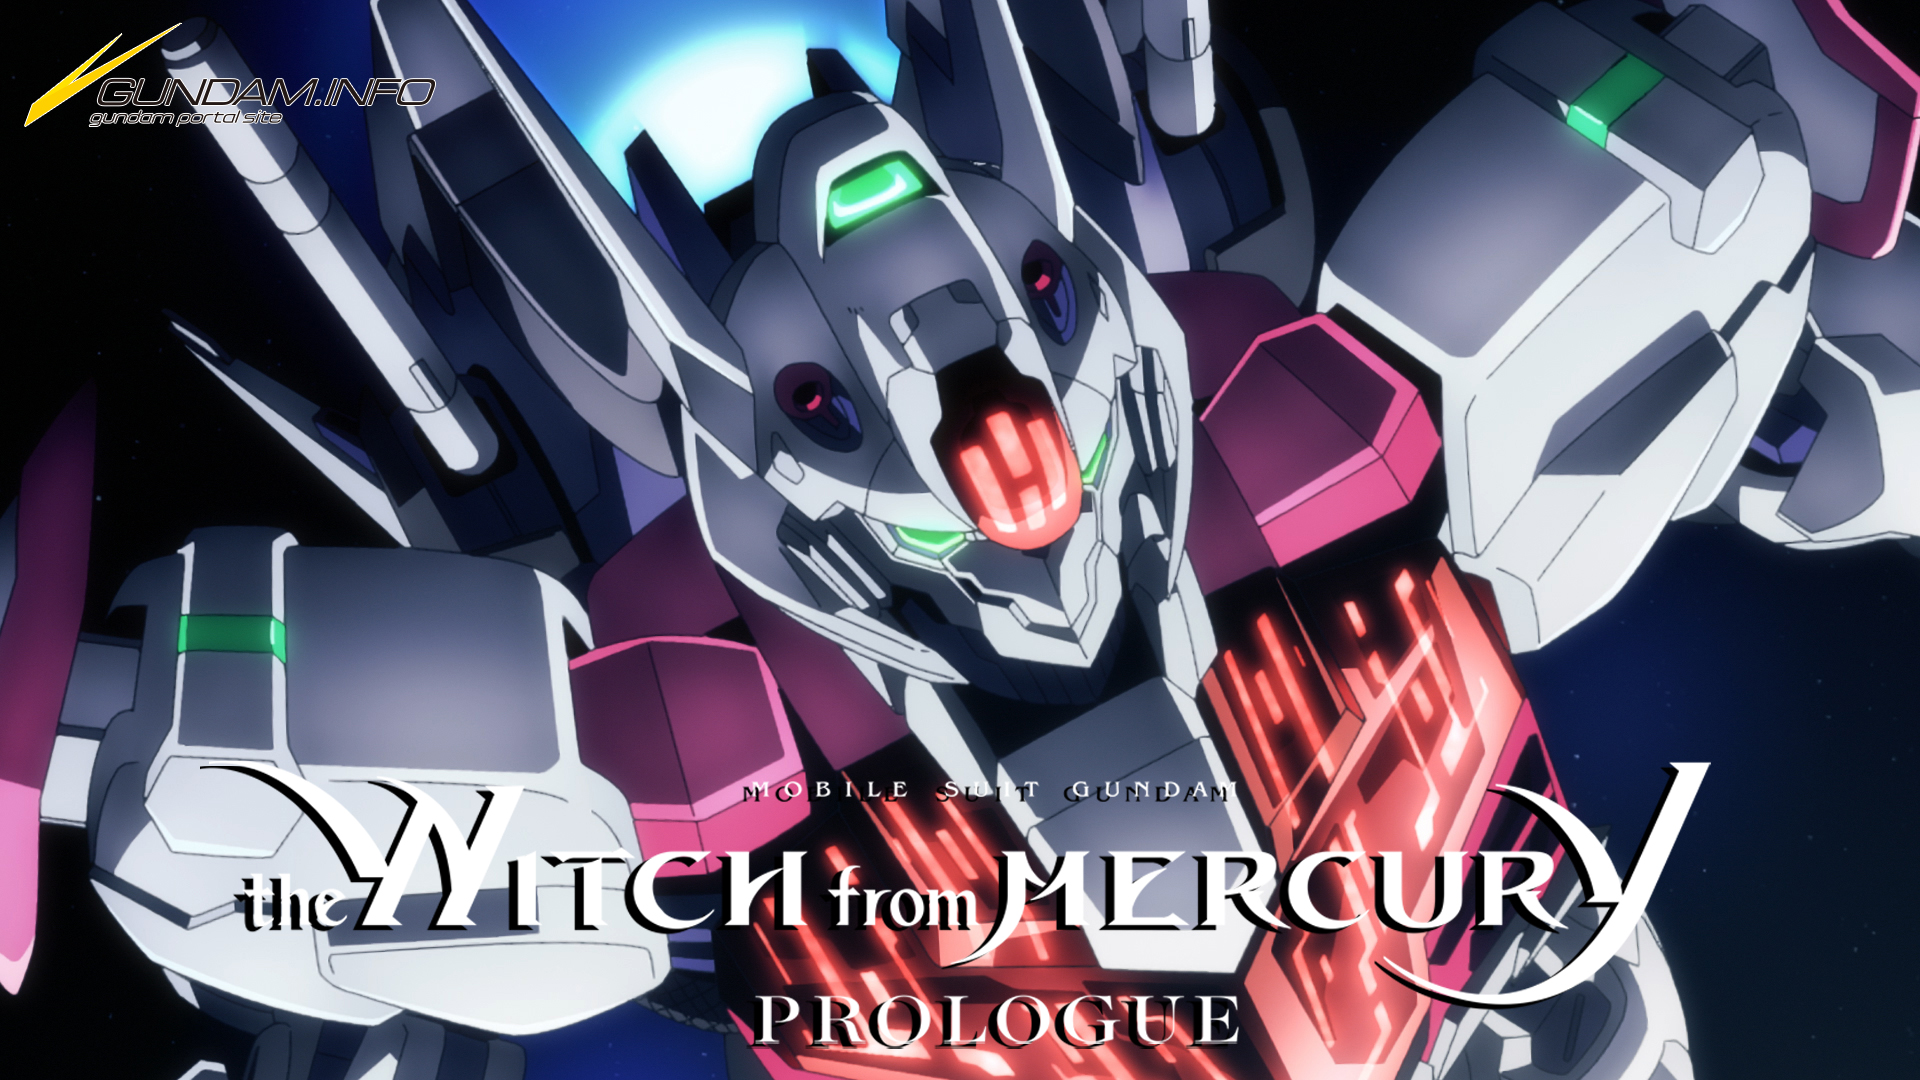 Crunchyroll Suit Gundam the Witch from Mercury Prologue Now Available On YouTube With English Subs